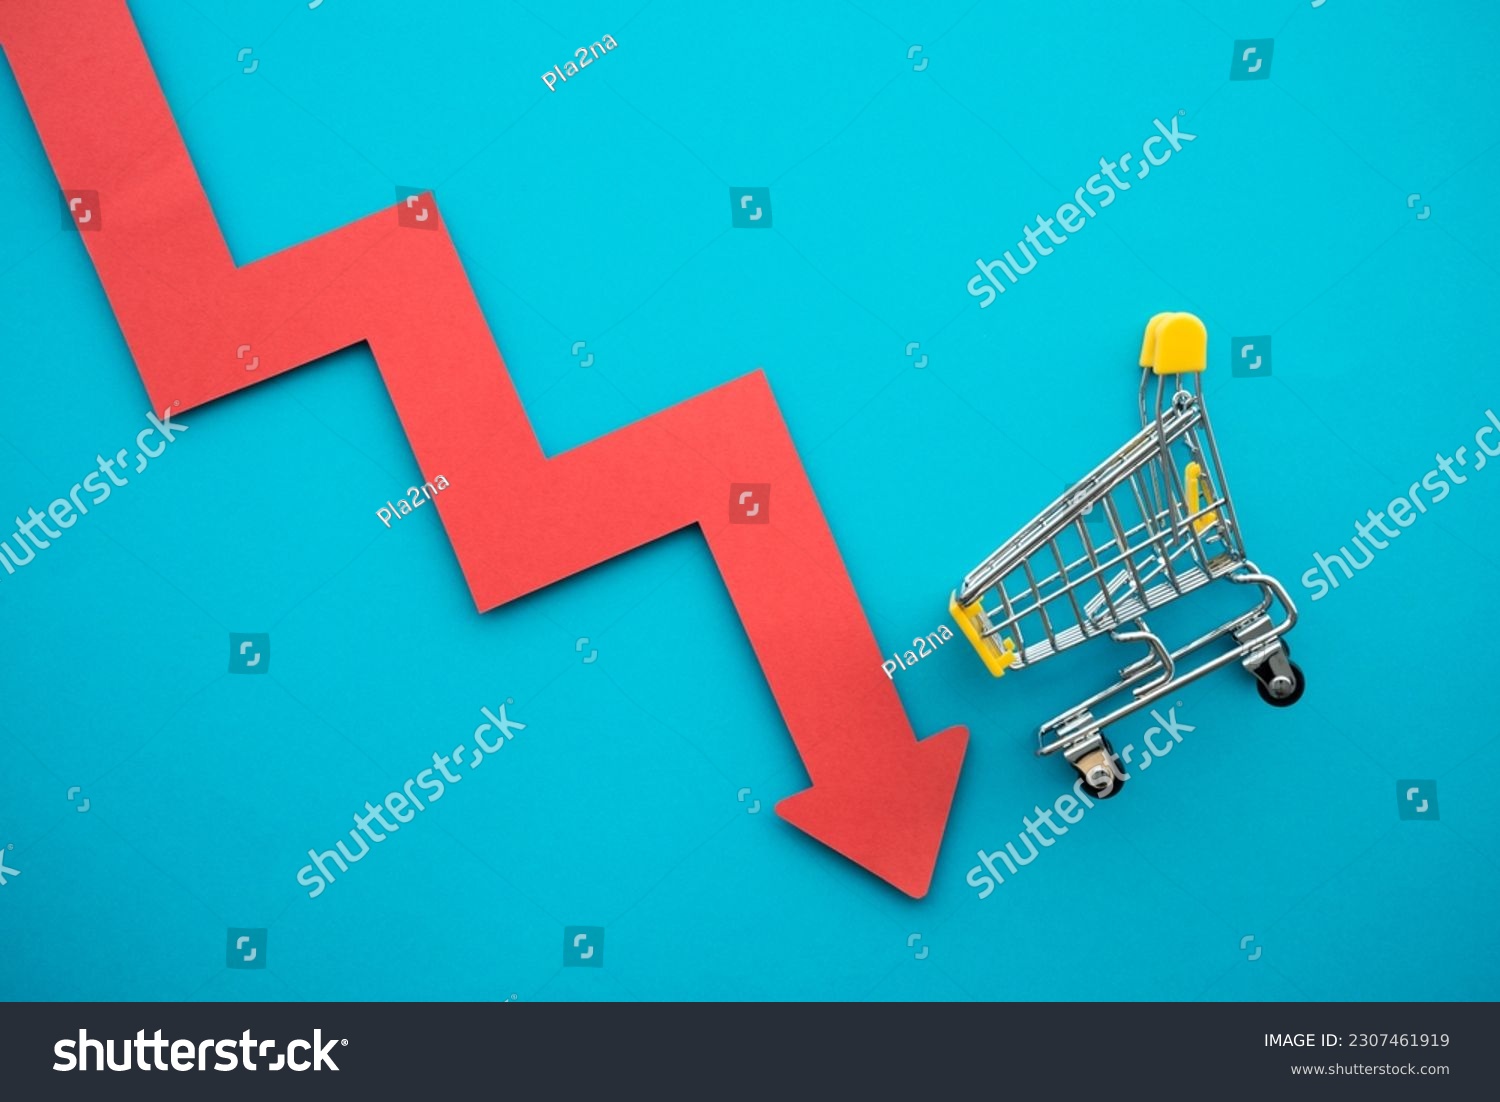 Shopping trolley with red chart falling down on blue background copy space. Global economic recession crisis, core retail sales decrease, inflation or goods price up concept. #2307461919